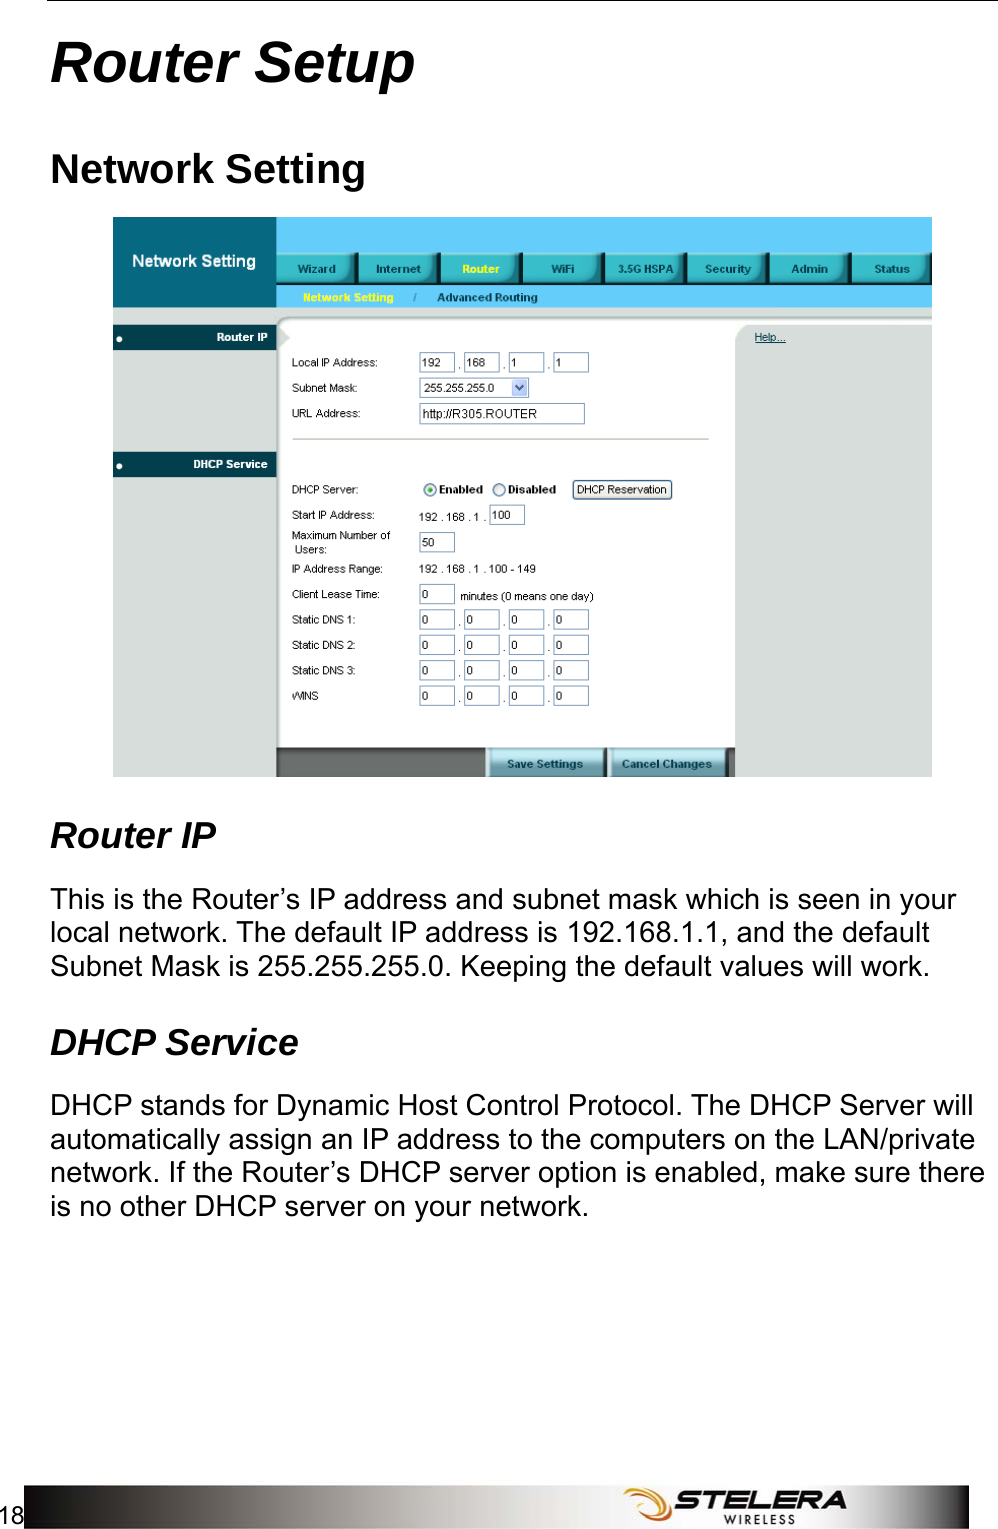 Router Setup 18   Router Setup Network Setting  Router IP This is the Router’s IP address and subnet mask which is seen in your local network. The default IP address is 192.168.1.1, and the default Subnet Mask is 255.255.255.0. Keeping the default values will work. DHCP Service DHCP stands for Dynamic Host Control Protocol. The DHCP Server will automatically assign an IP address to the computers on the LAN/private network. If the Router’s DHCP server option is enabled, make sure there is no other DHCP server on your network.   